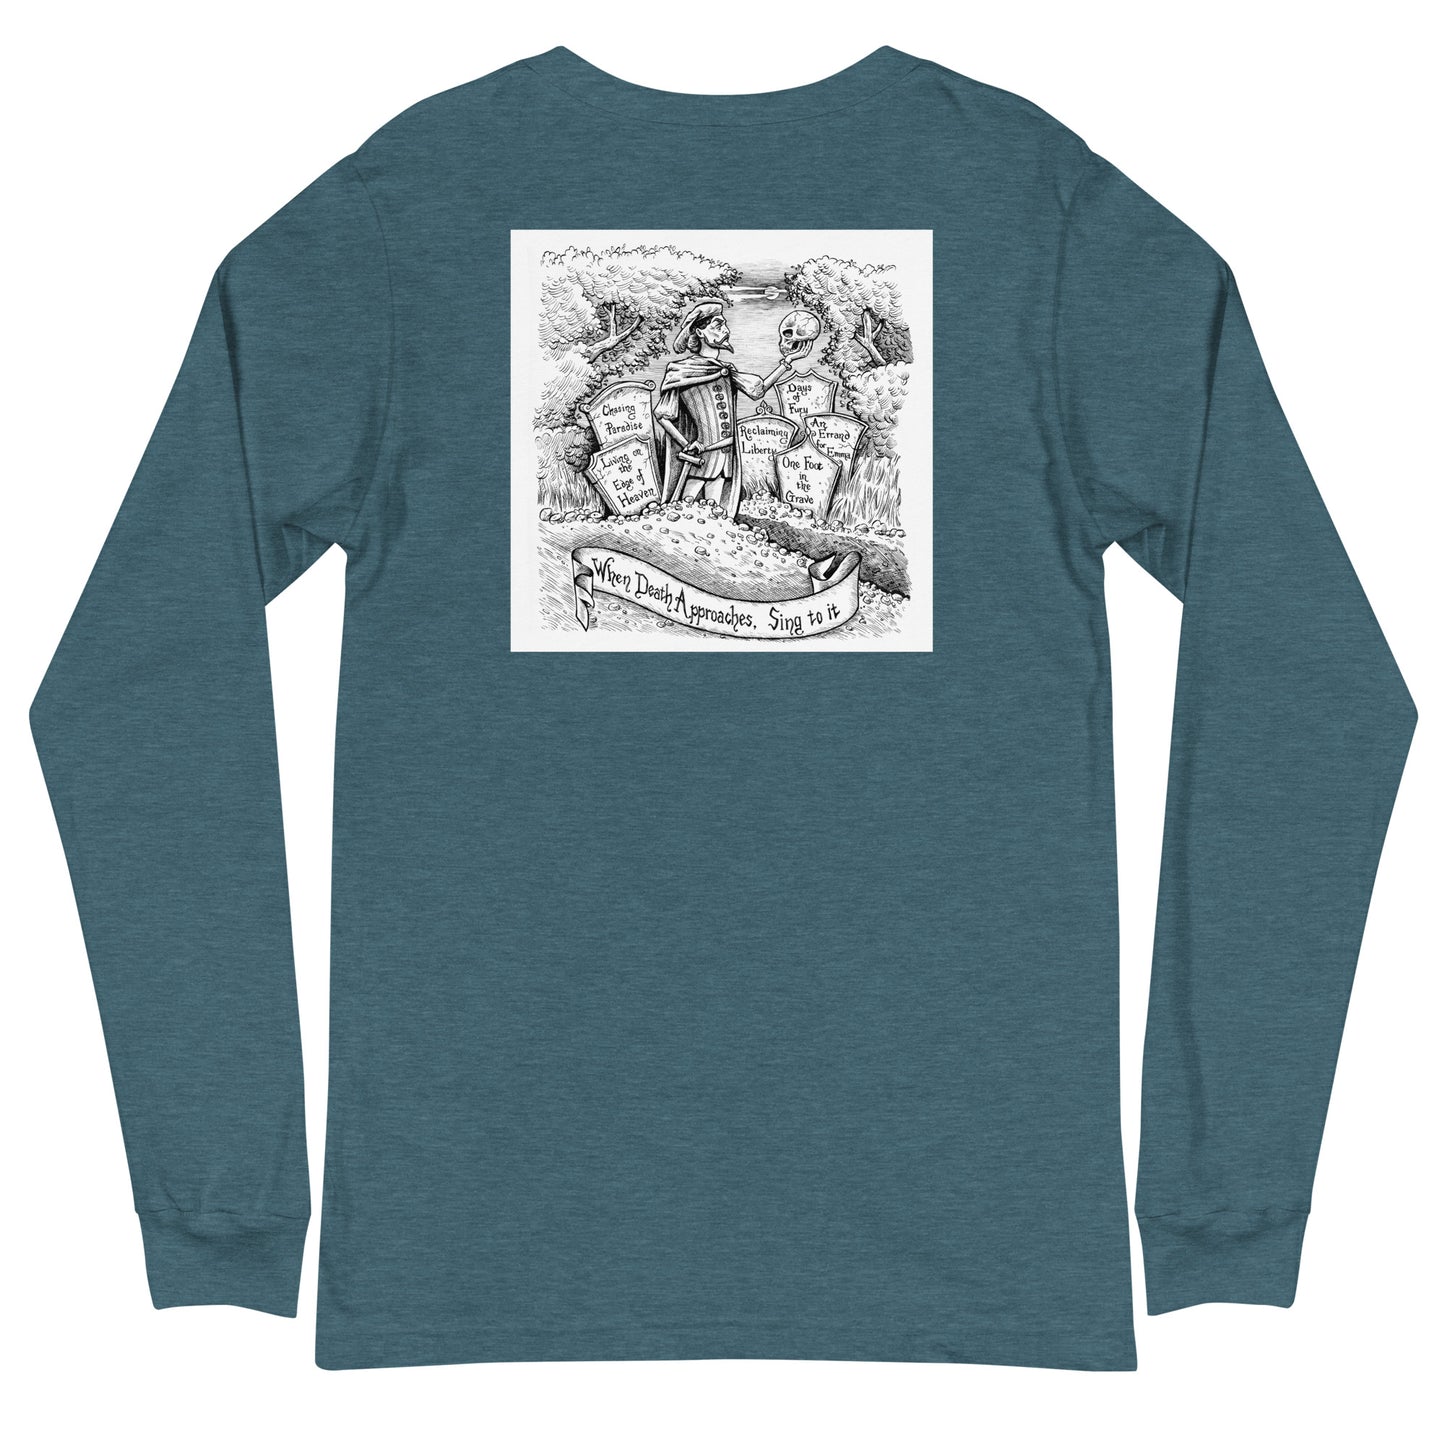 When Death Approaches, Sing To It Long Sleeve